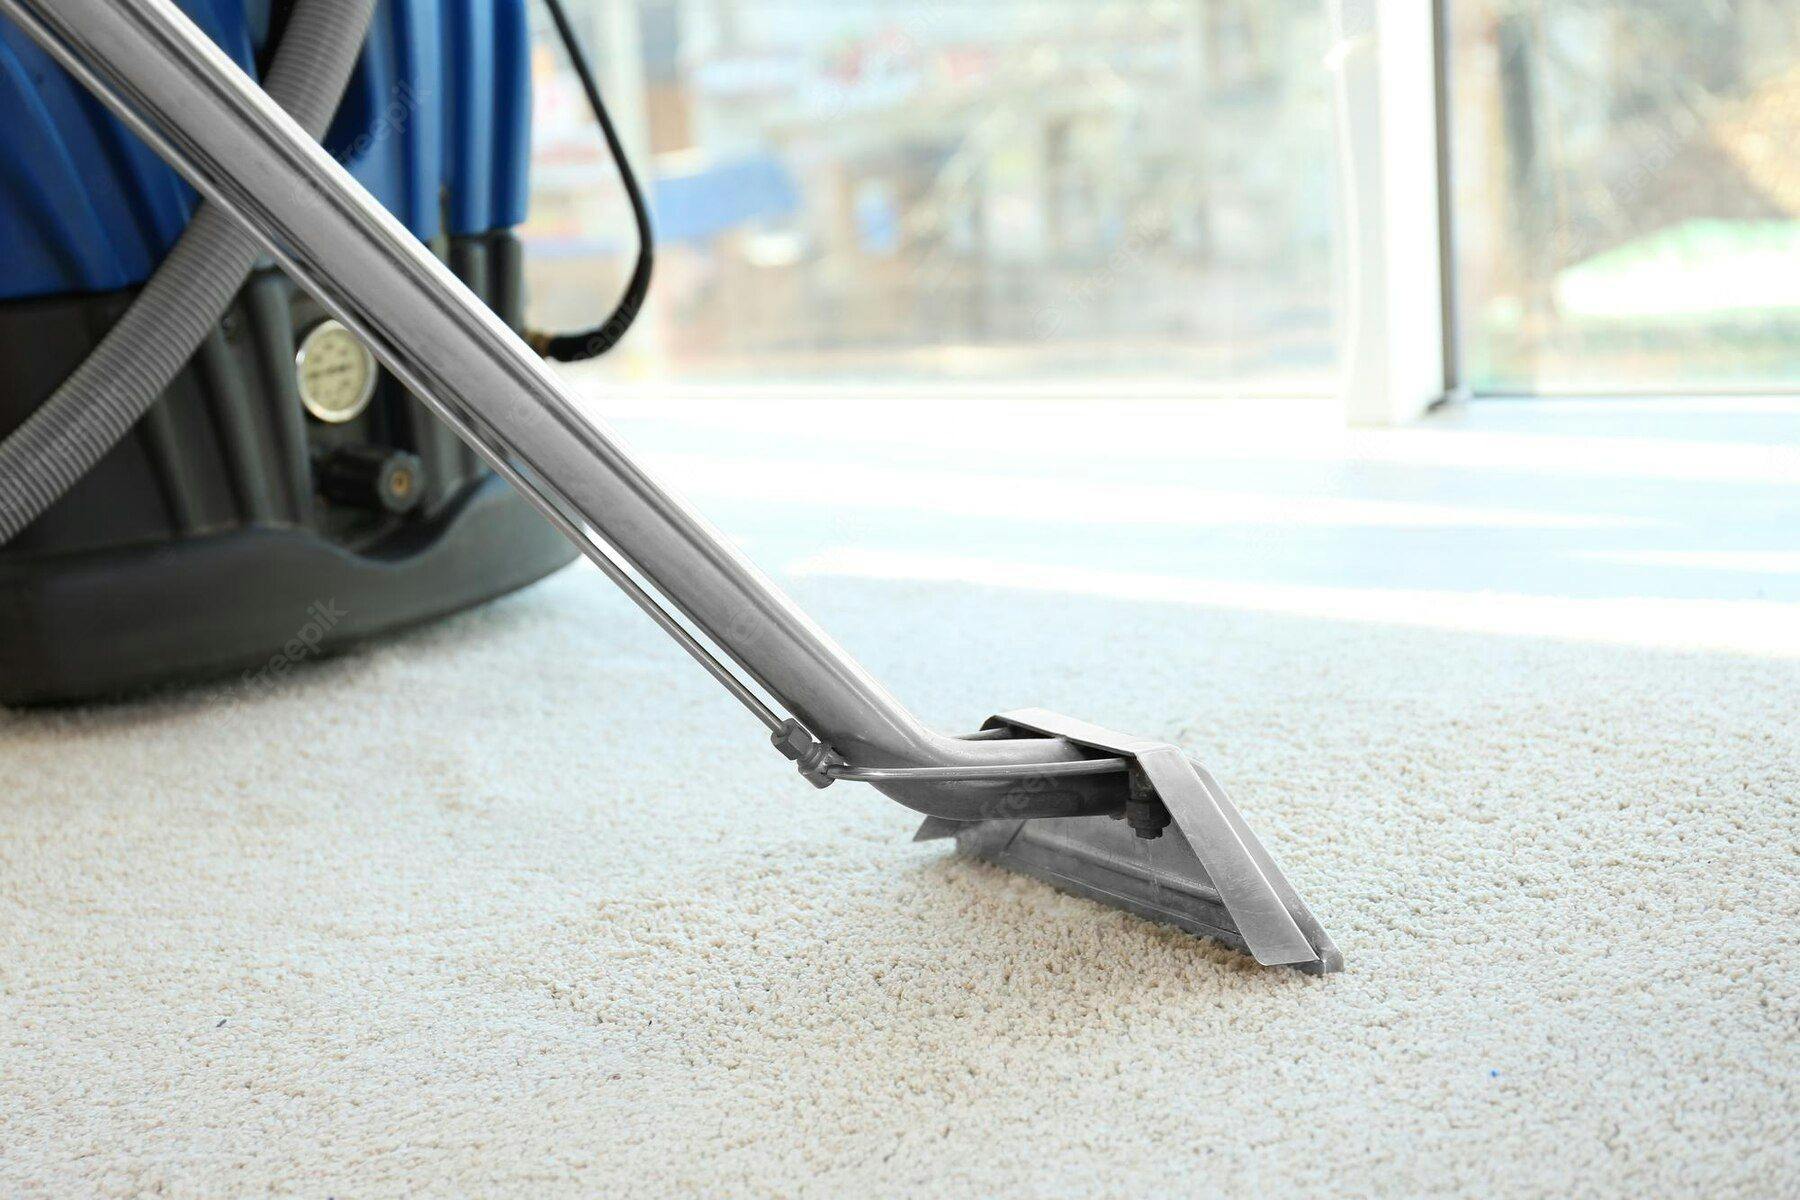 carpet being cleaned by machine